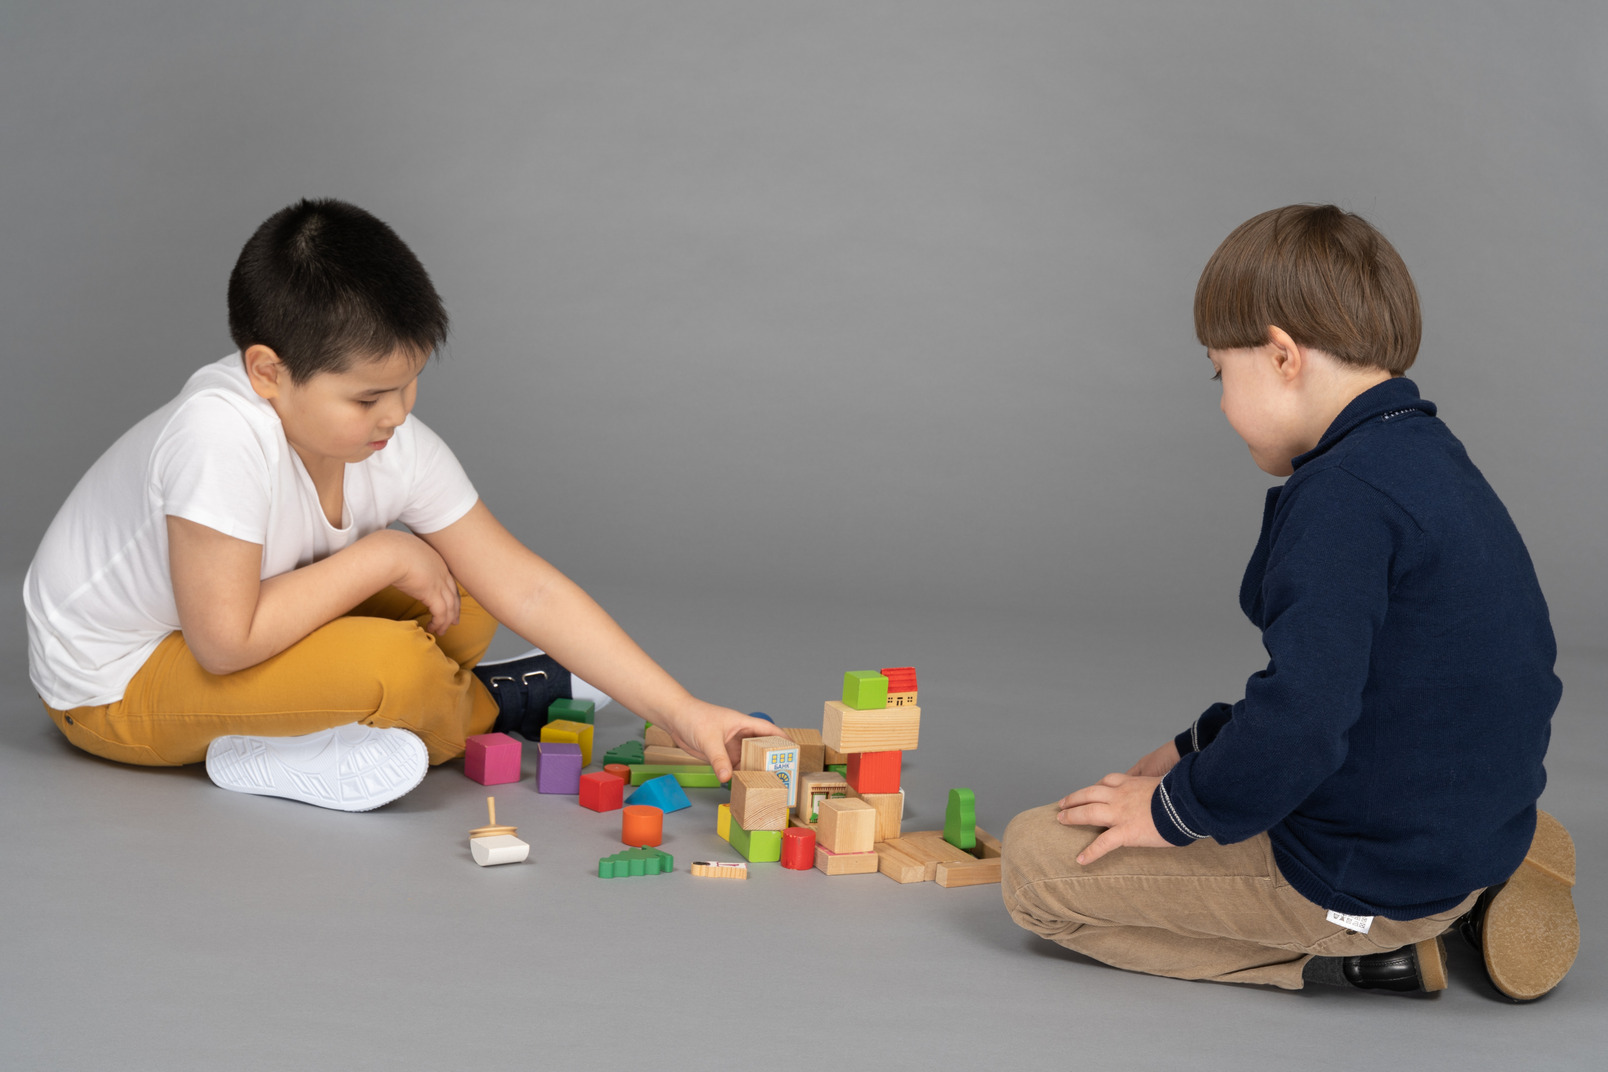 Kids playing with toy blocks